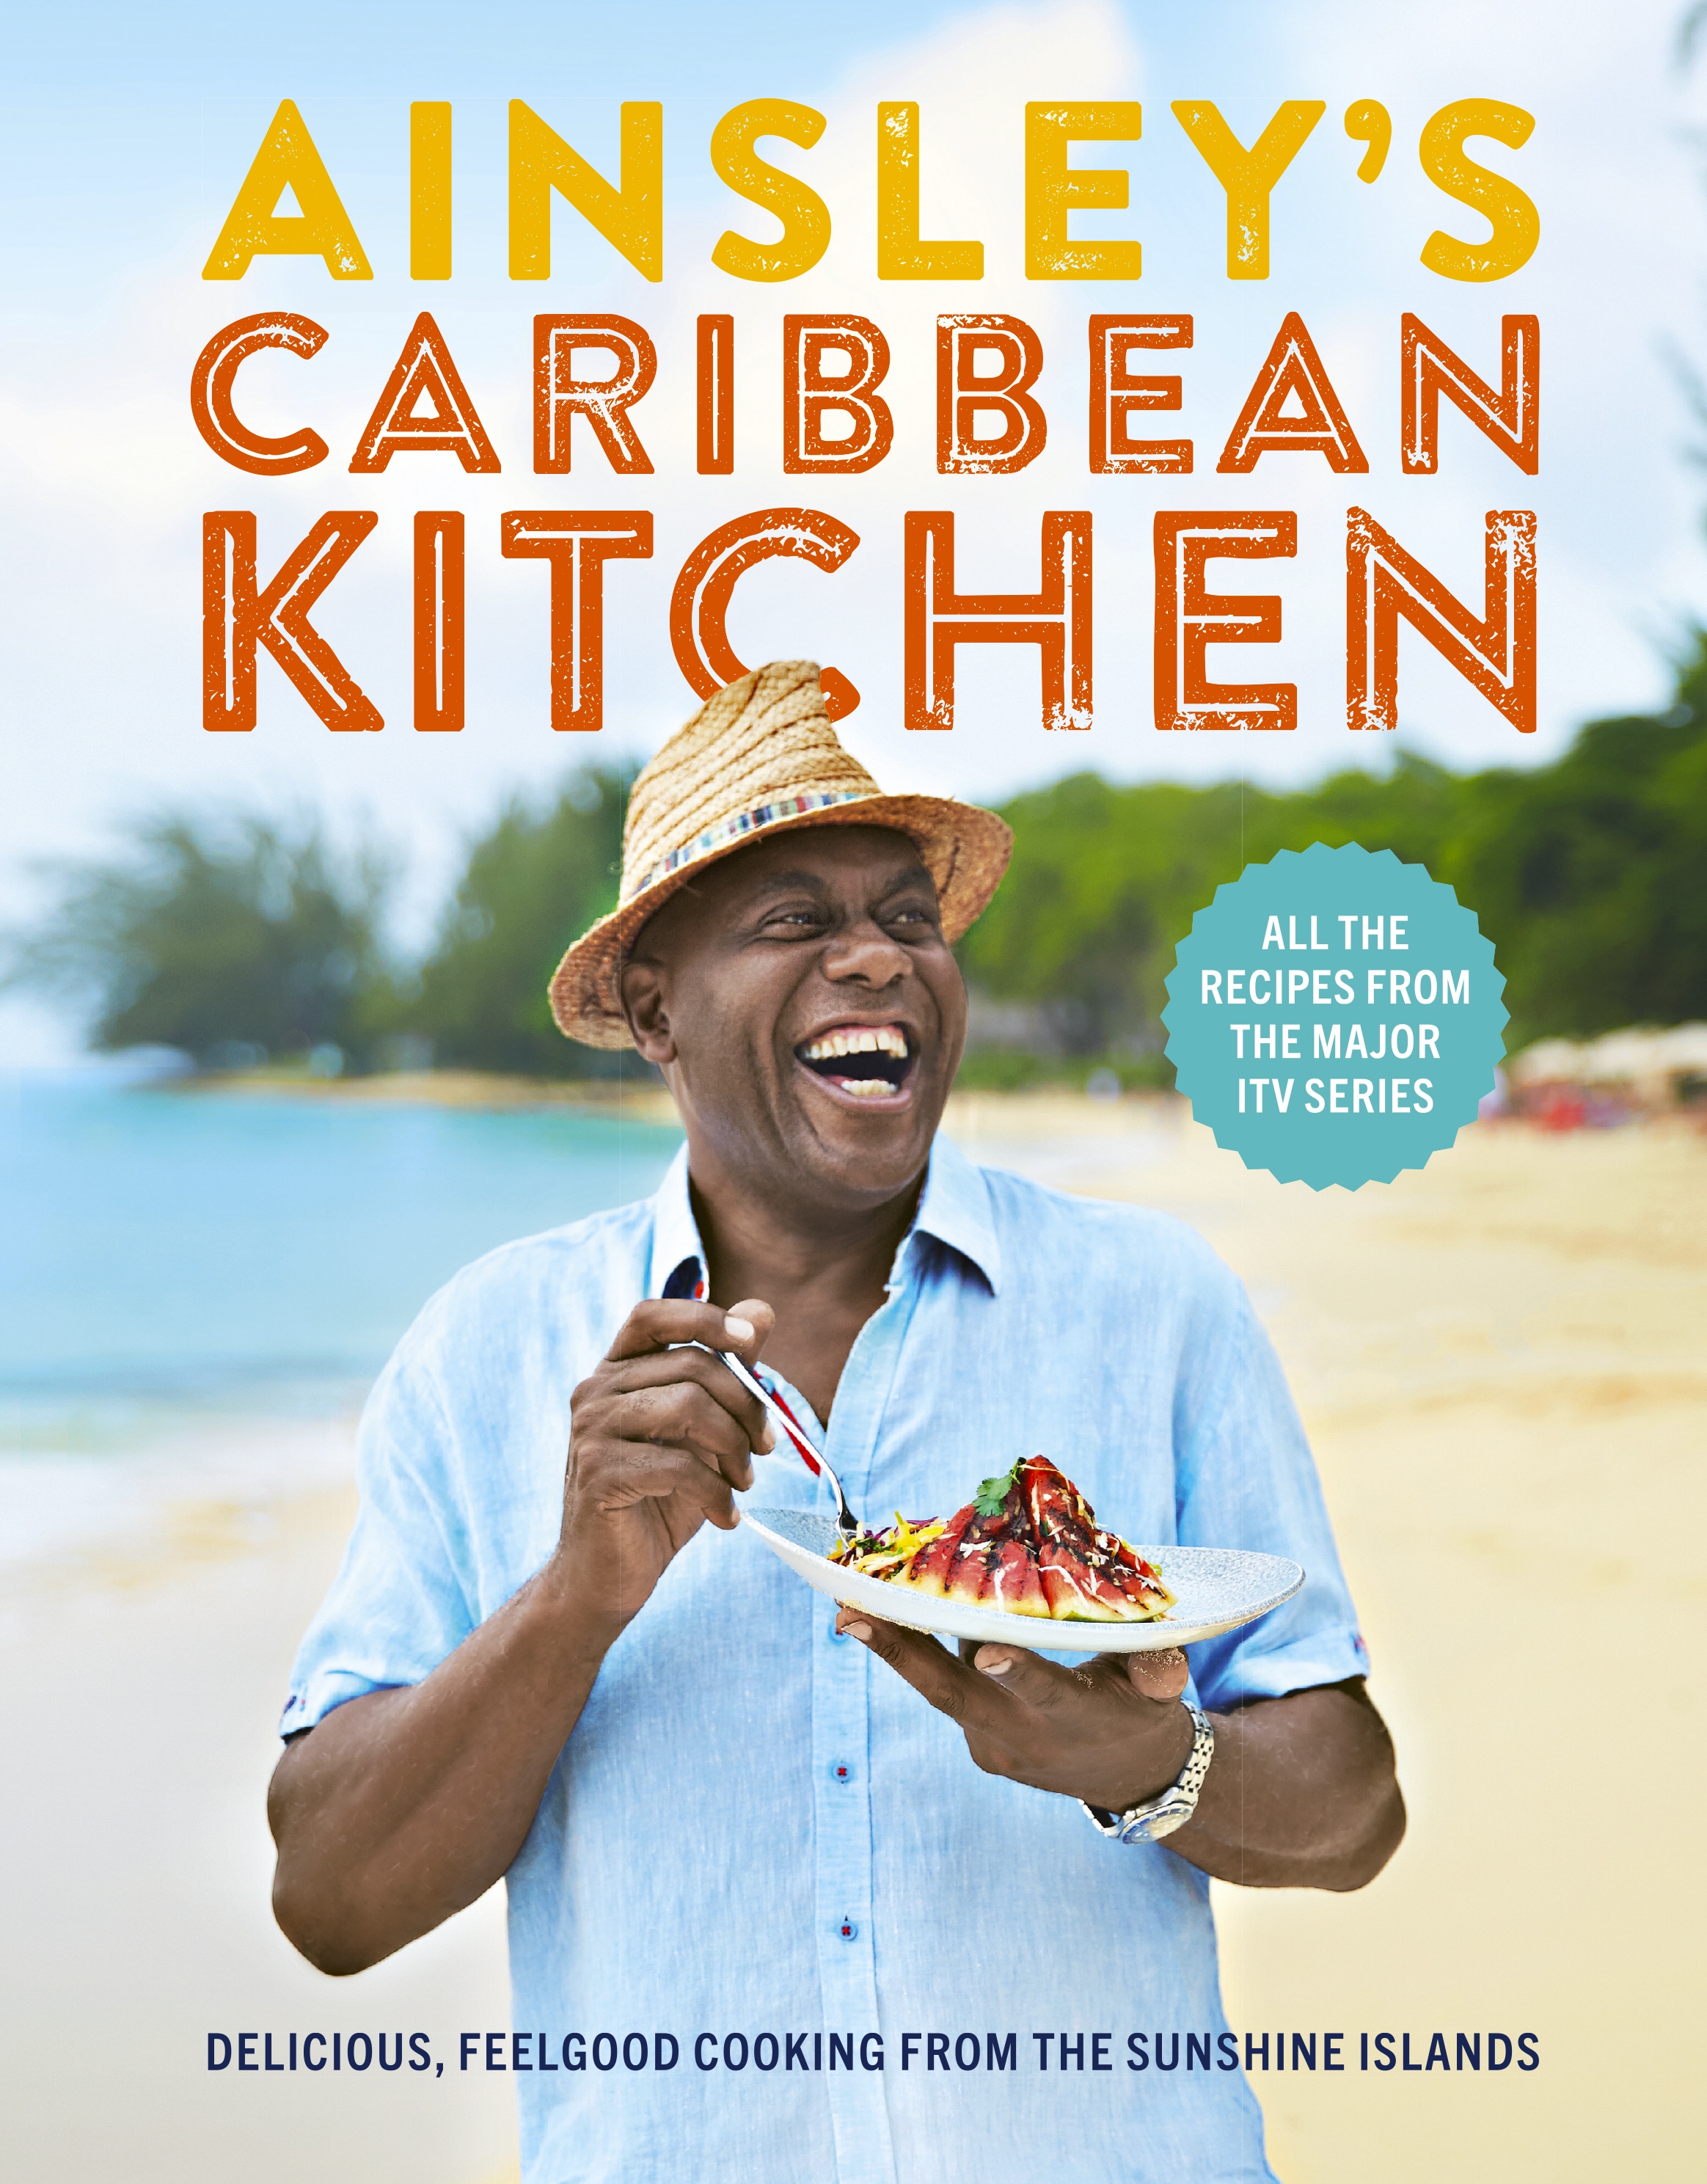 Book “Ainsley's Caribbean Kitchen” by Ainsley Harriott — July 11, 2019